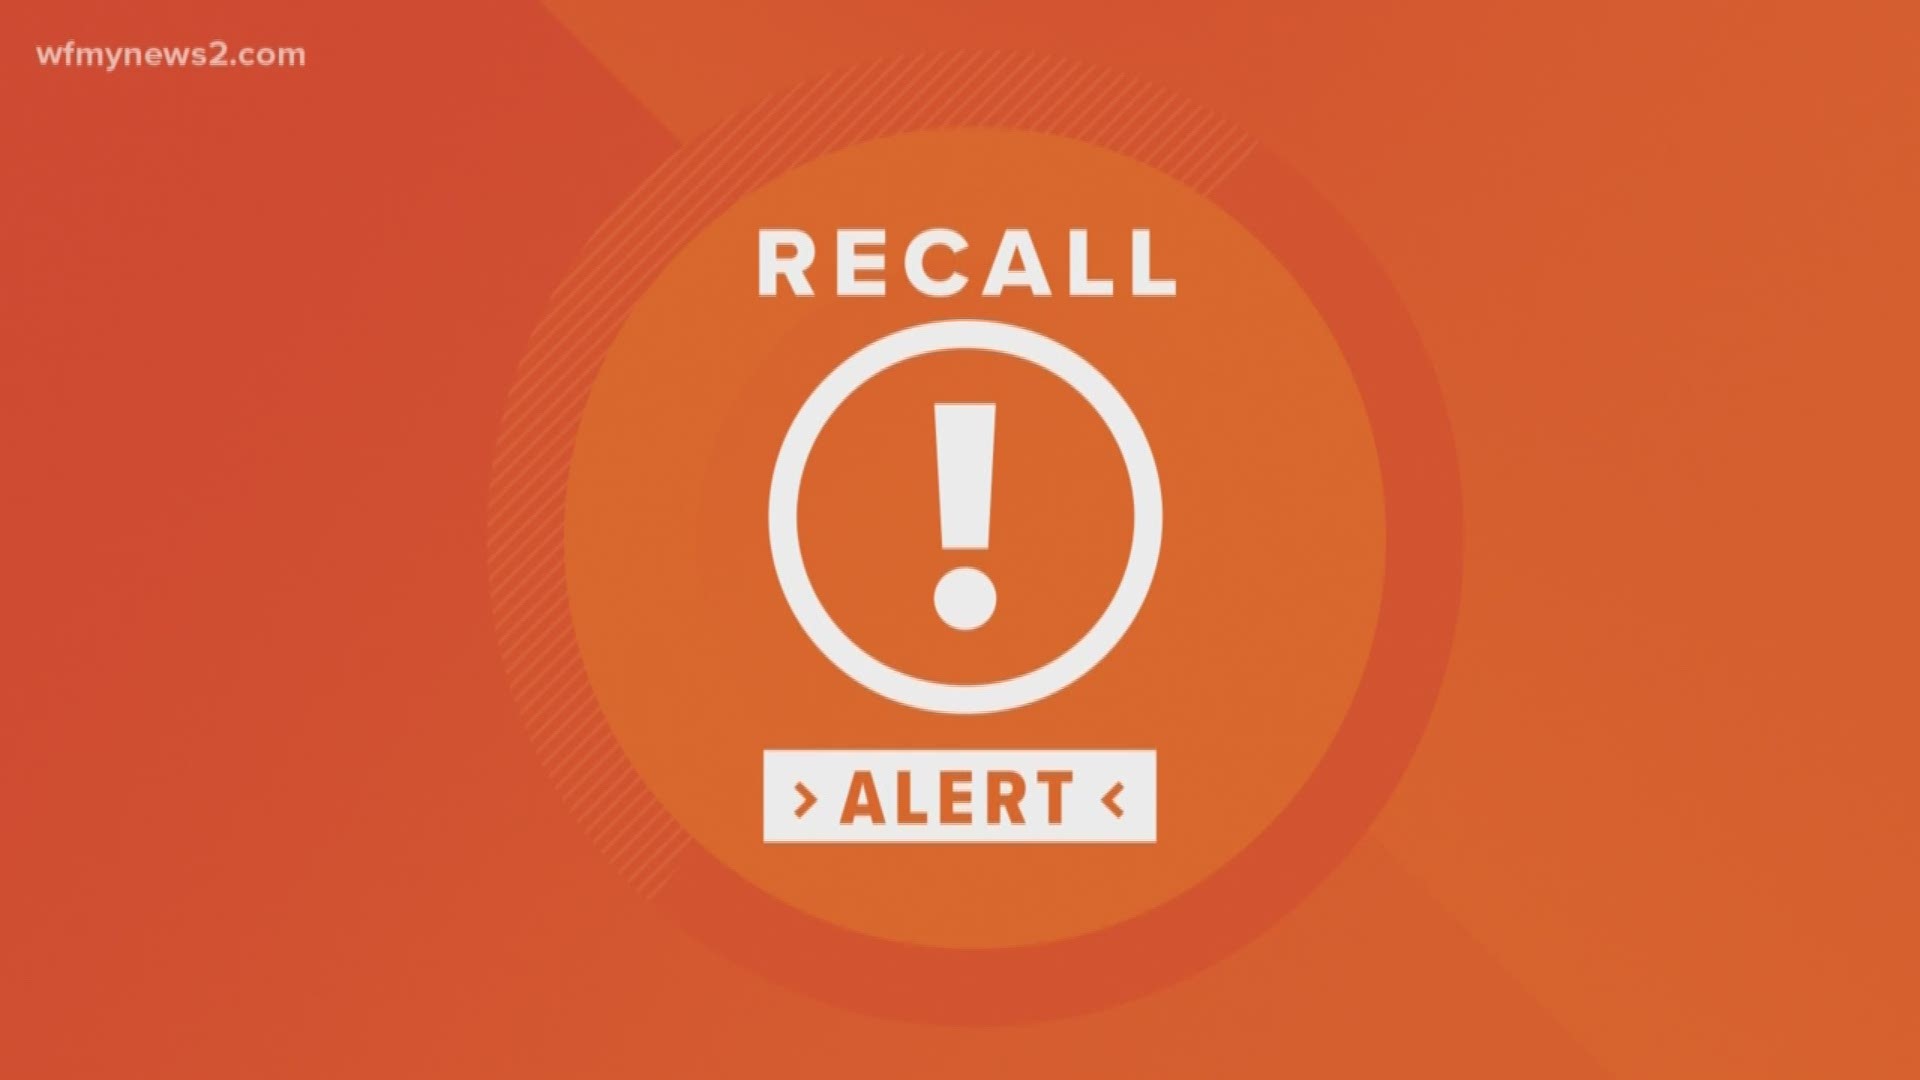 North Carolina is one of 16 state impacted by the recall. The pre-cut melons were sold at Target, Walmart and Trader Joe's